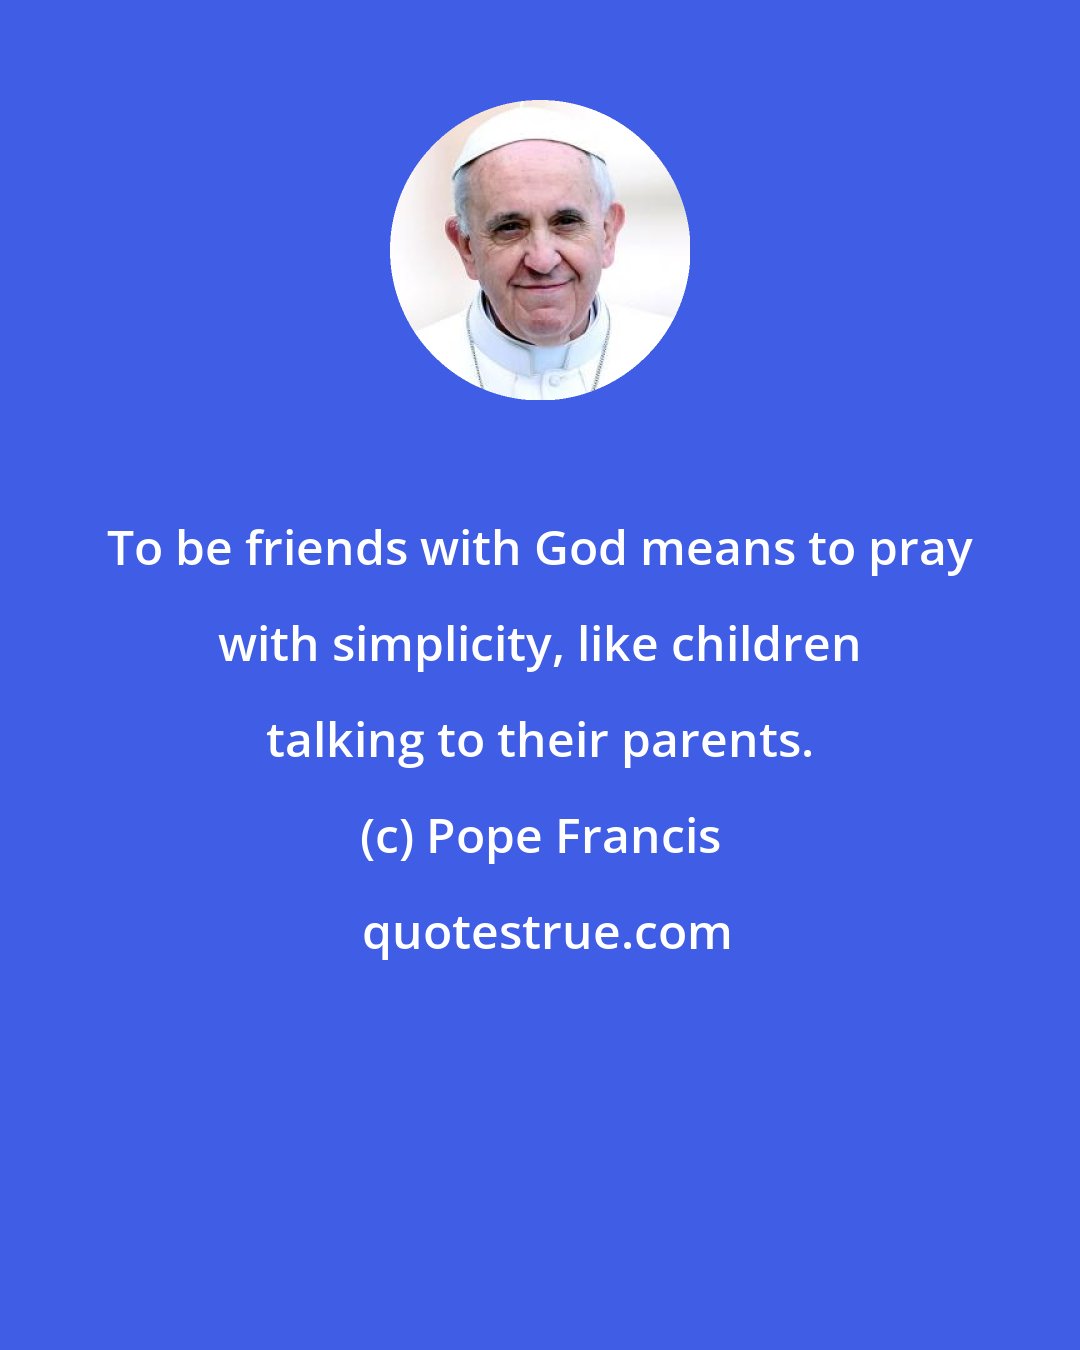 Pope Francis: To be friends with God means to pray with simplicity, like children talking to their parents.